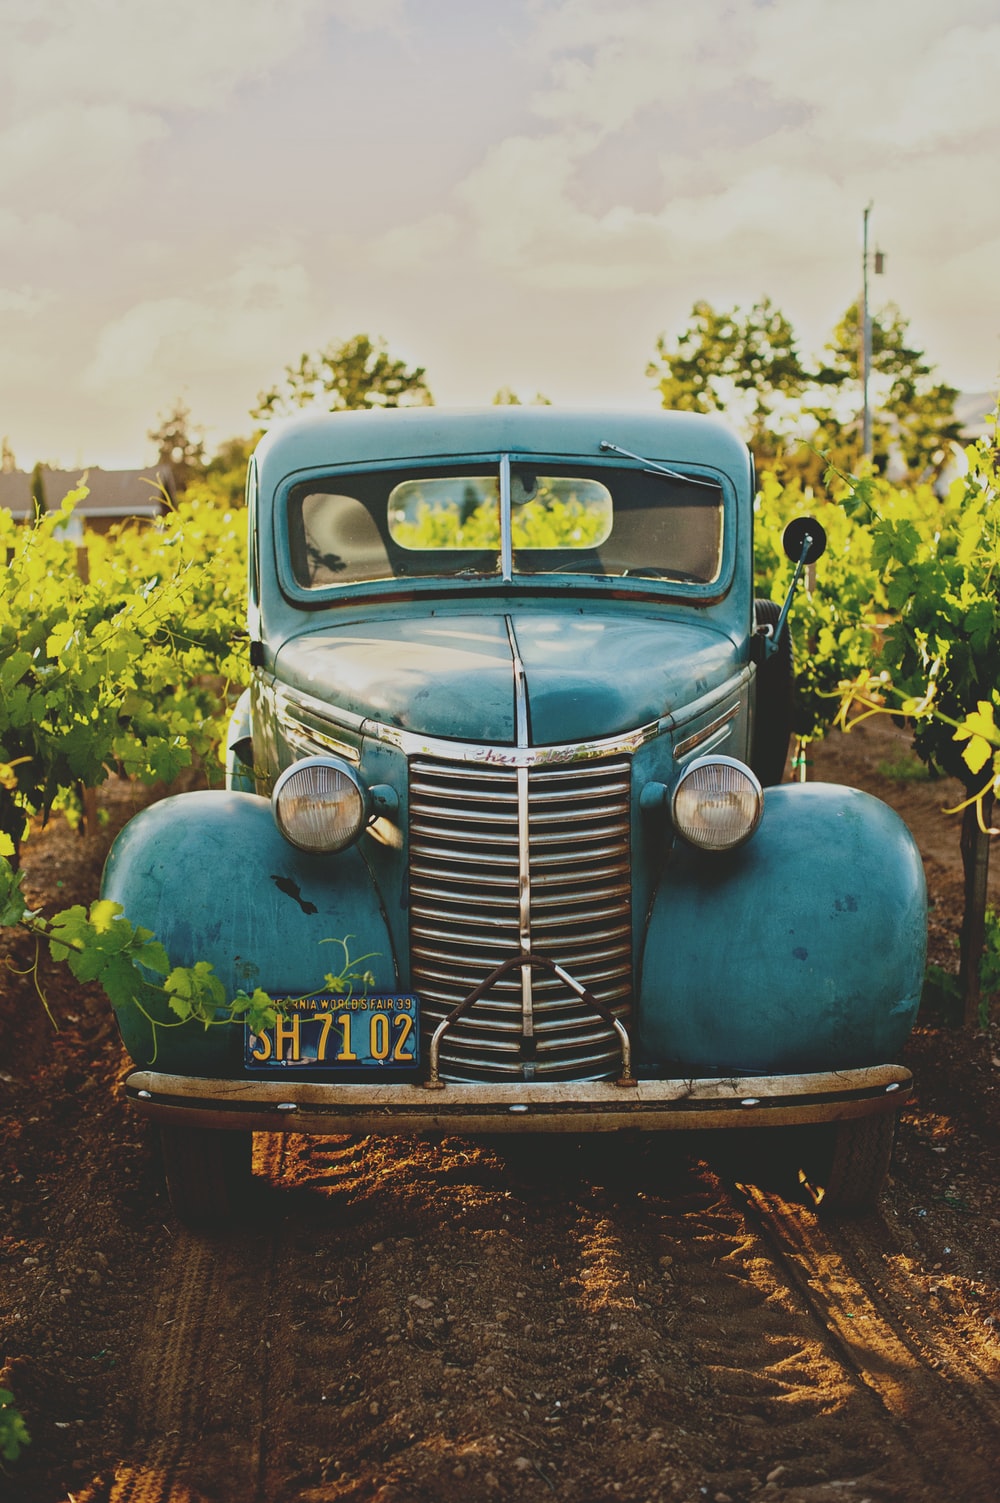 Old Truck Picture. Download Free Image